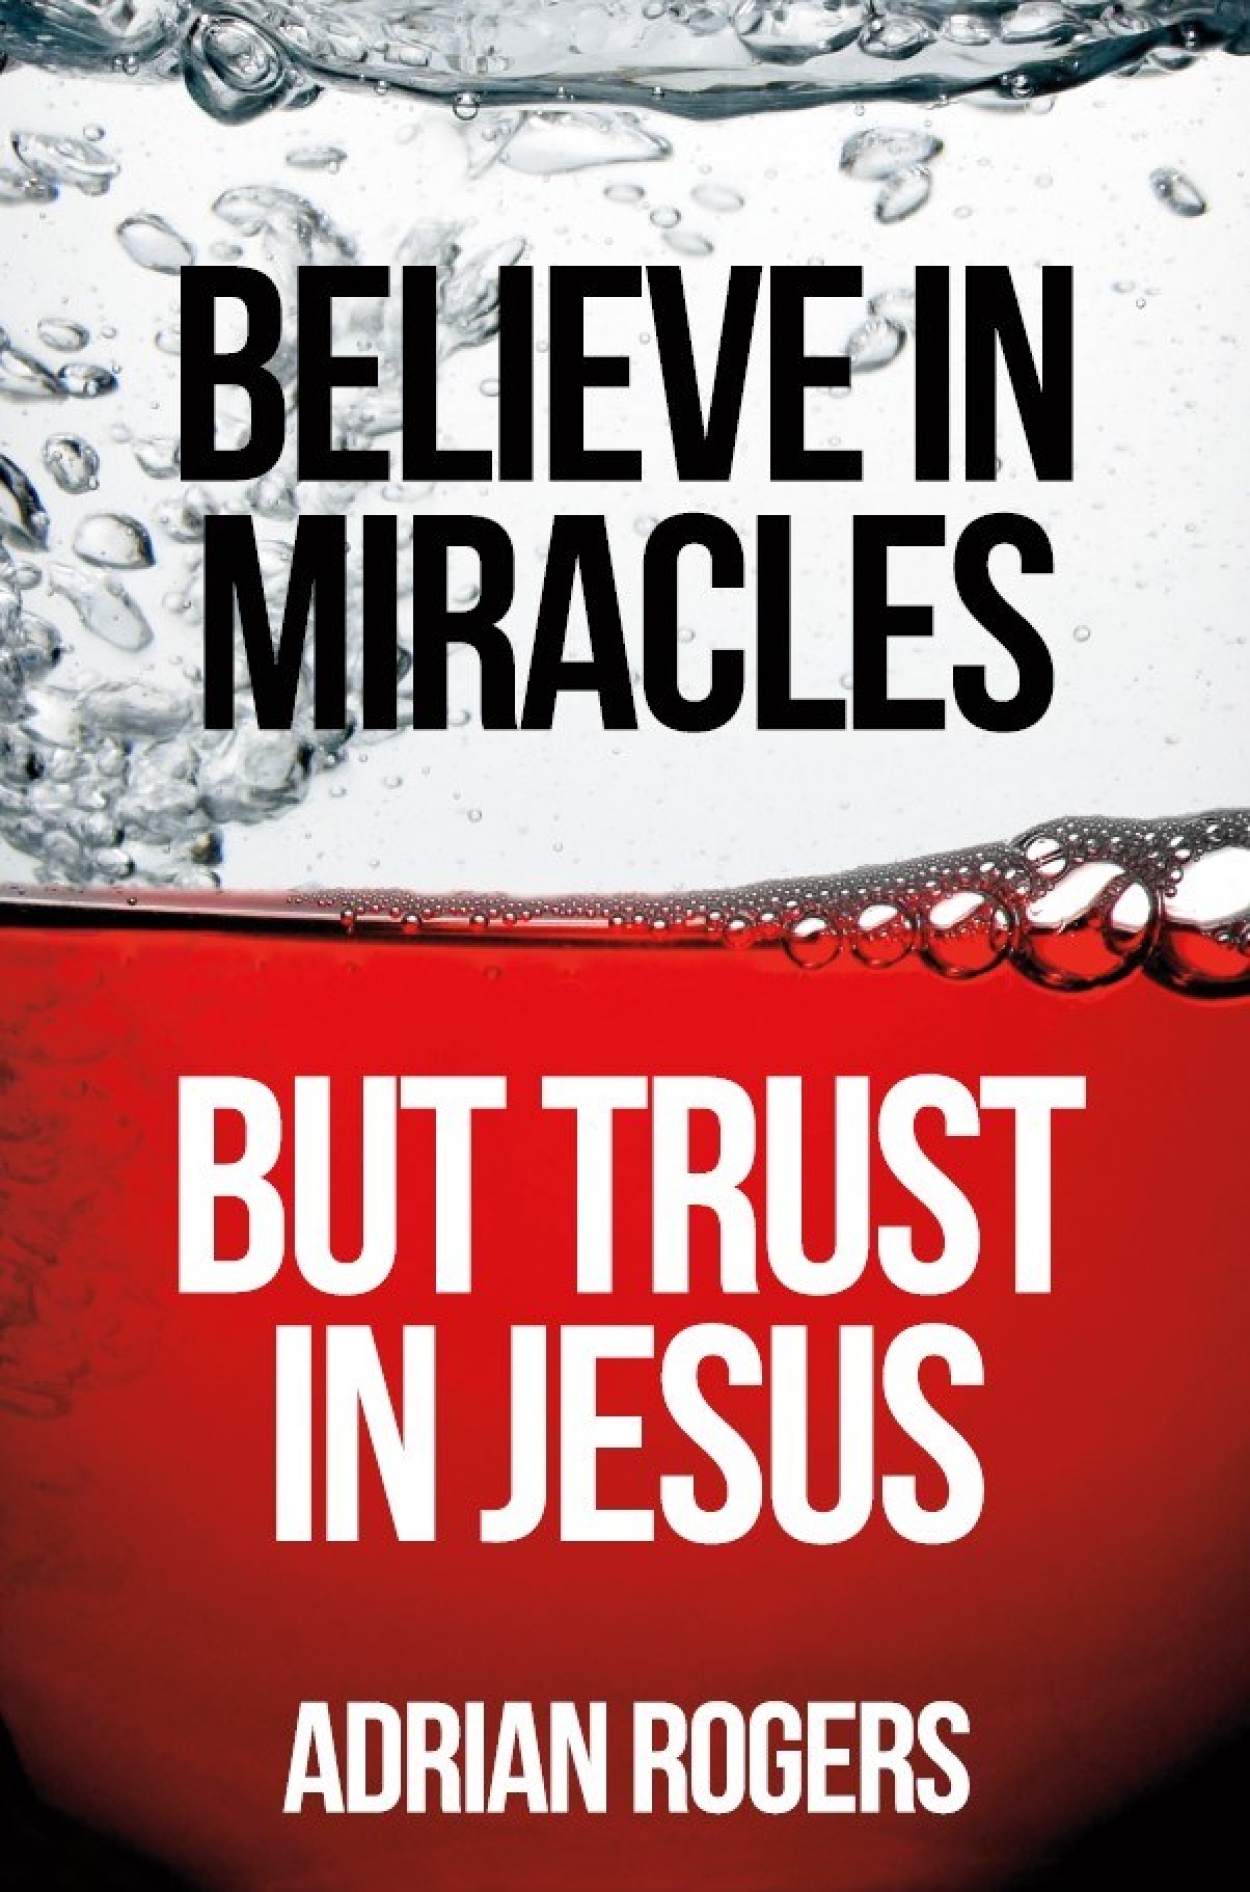 B105 believe in miracles but trust in jesus book STORE DETAIL front